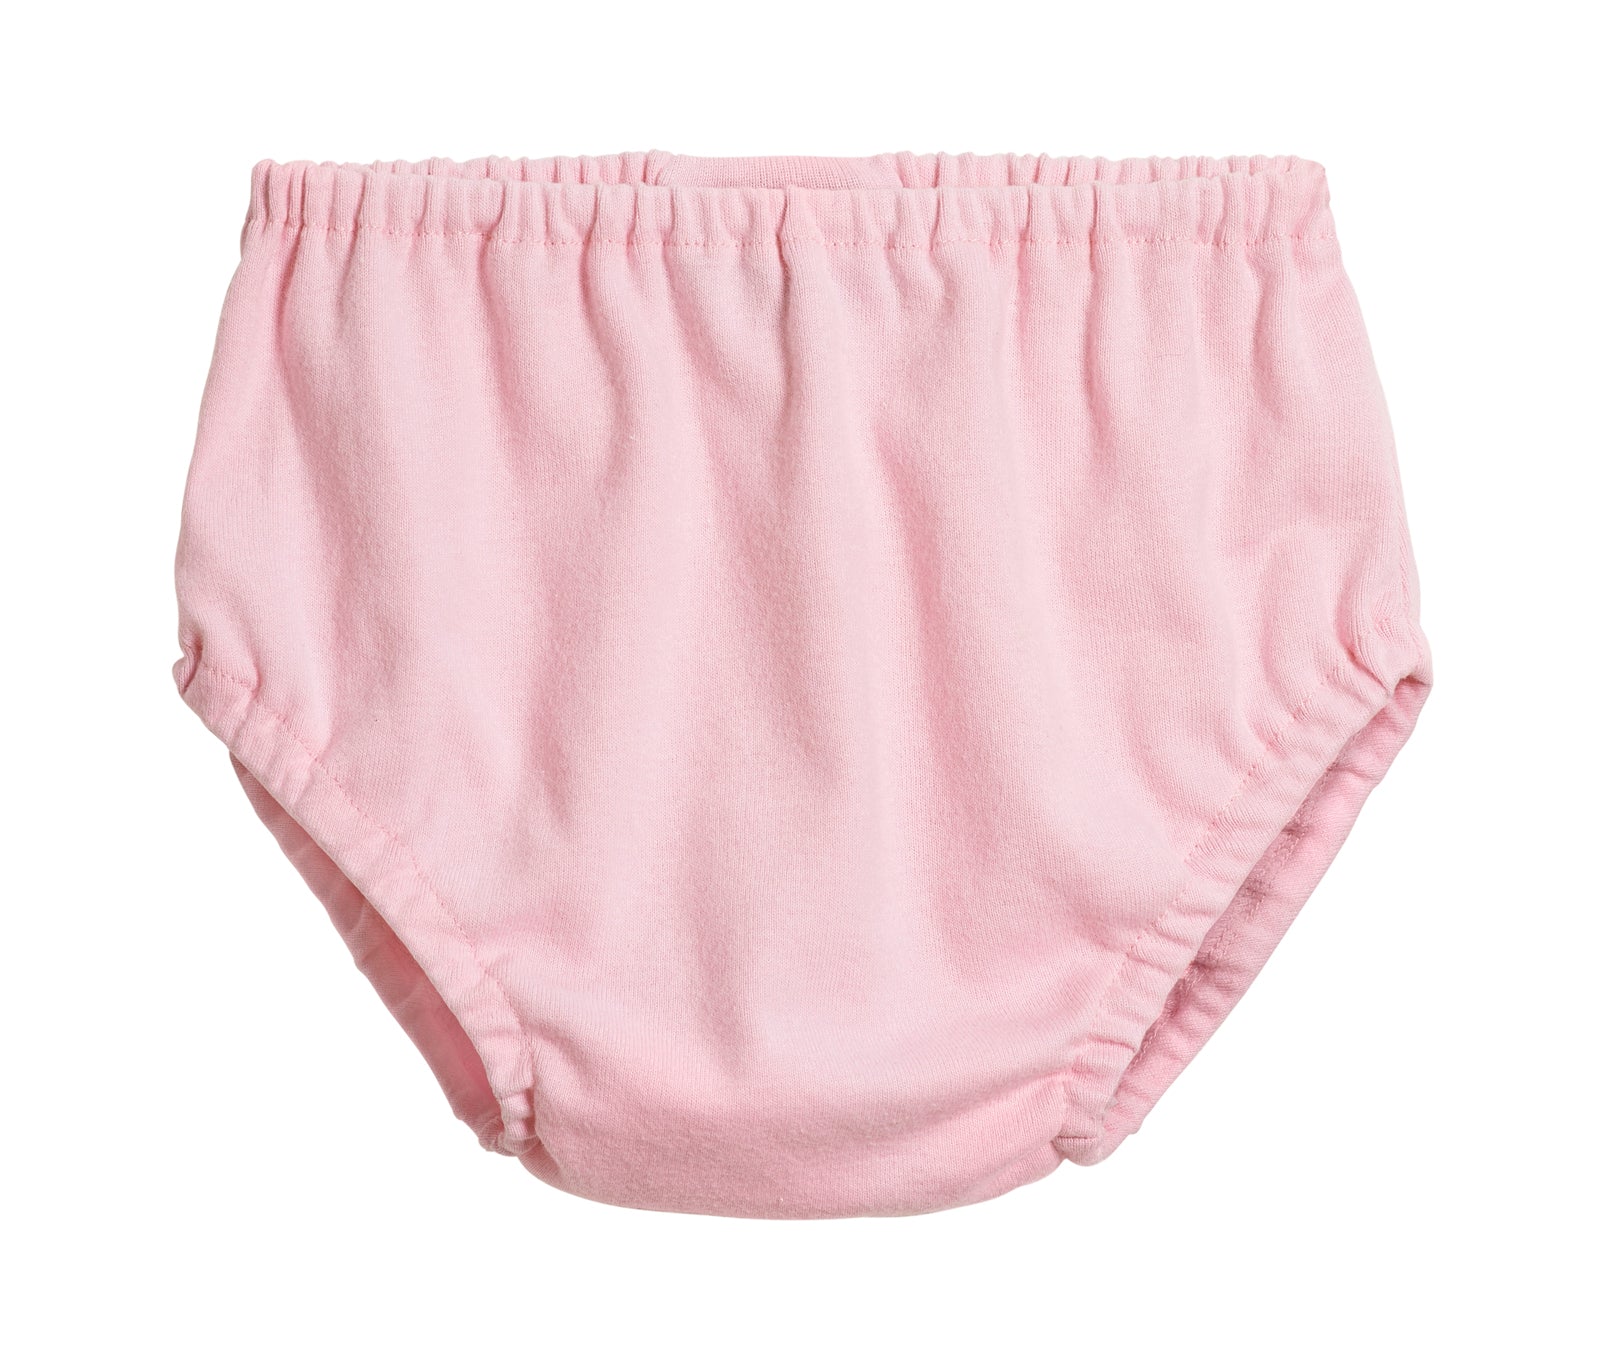 Boys and Girls Soft Cotton Diaper Cover